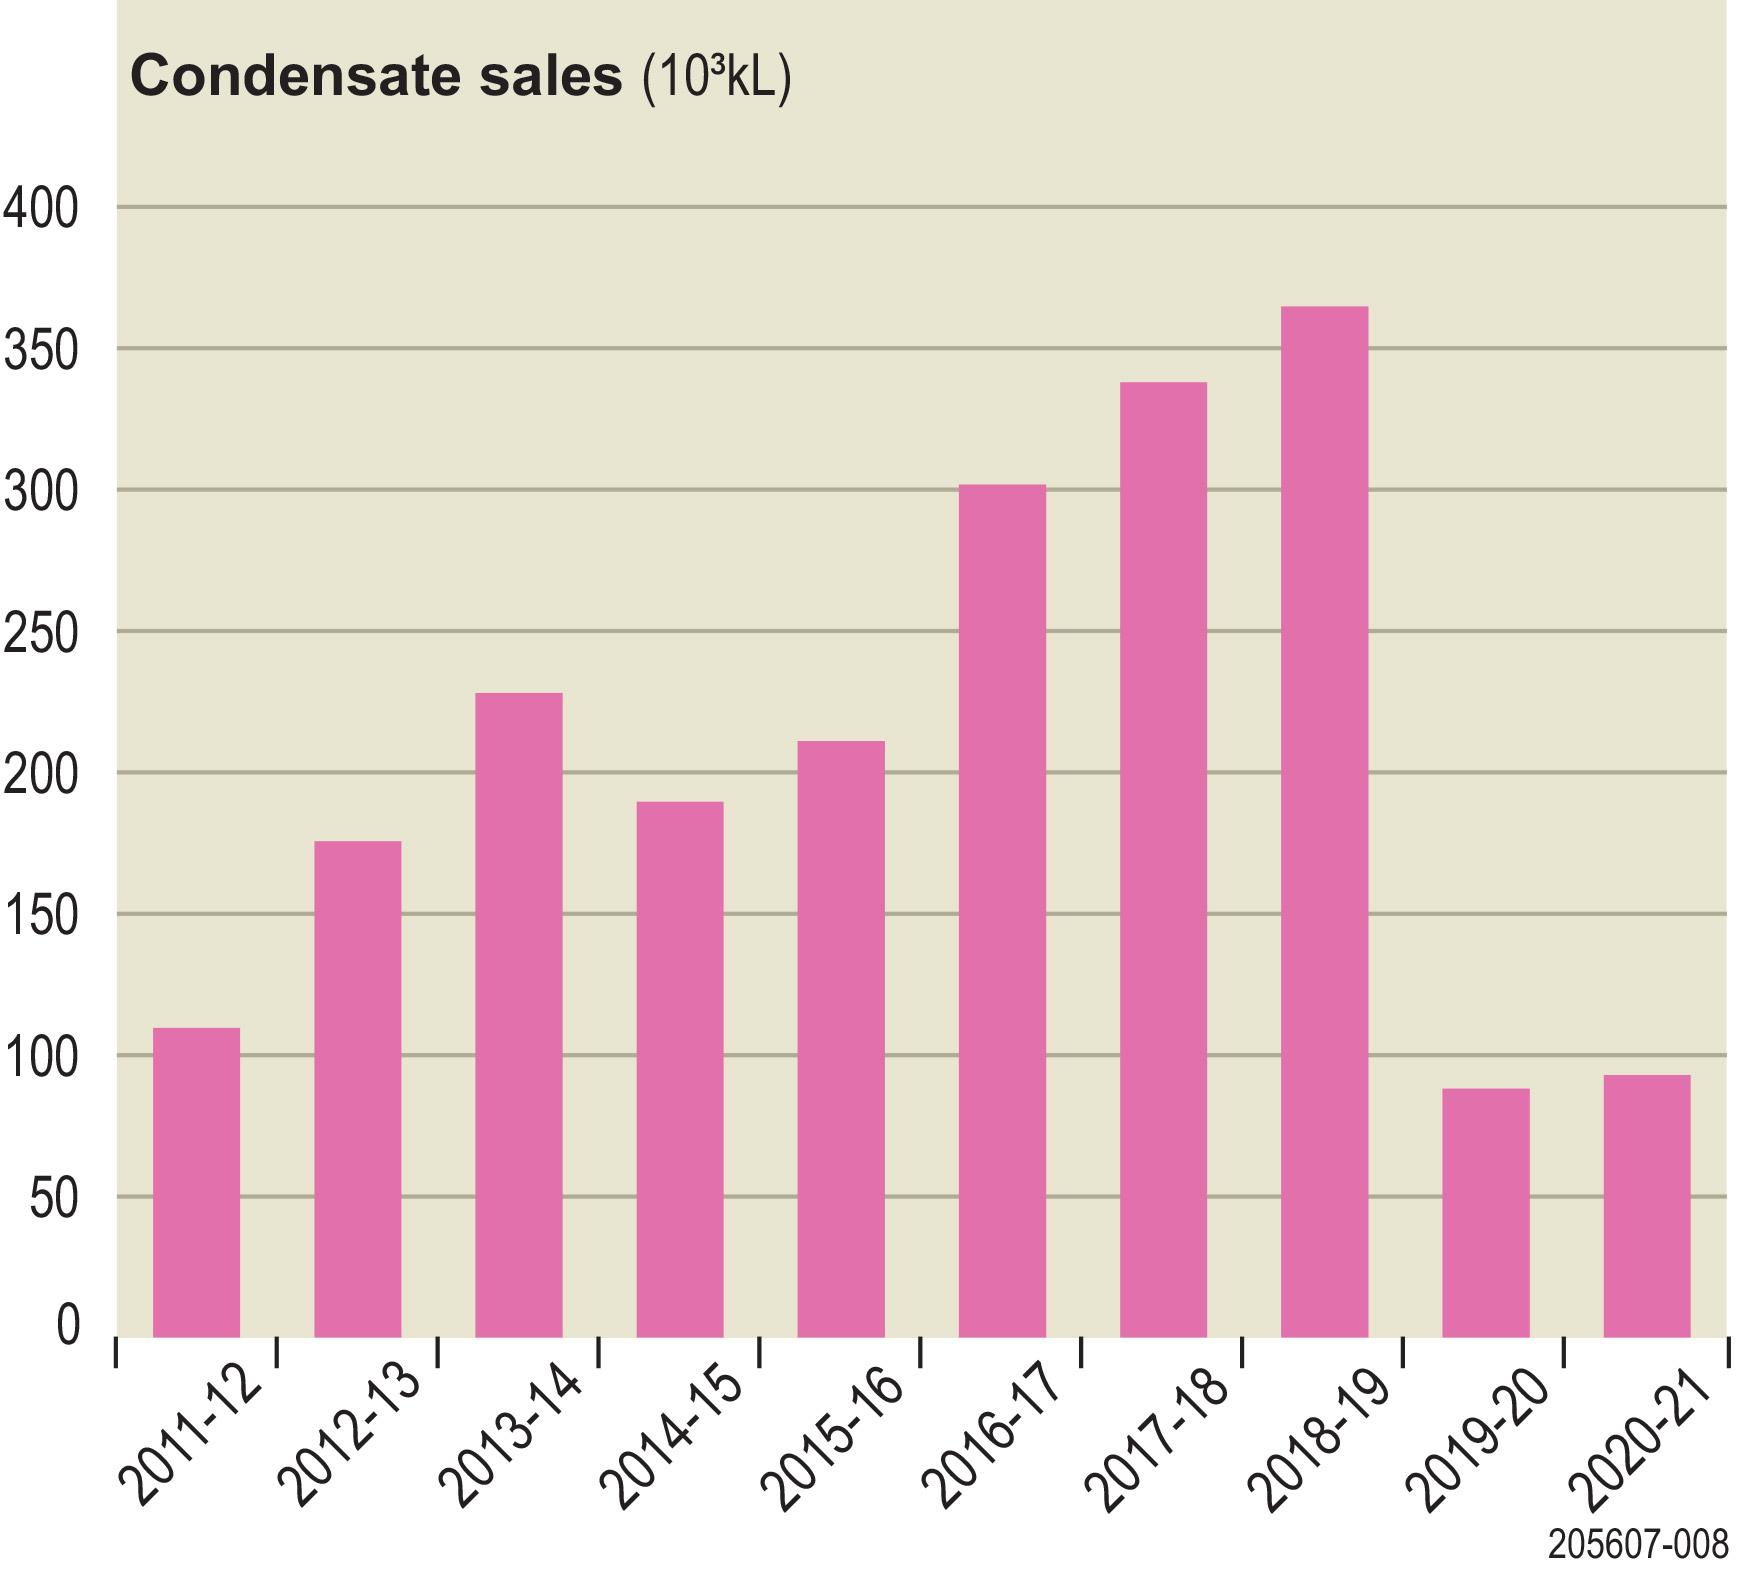 Graph showing condensate sales between 2011-12 and 2020-21 financial years.